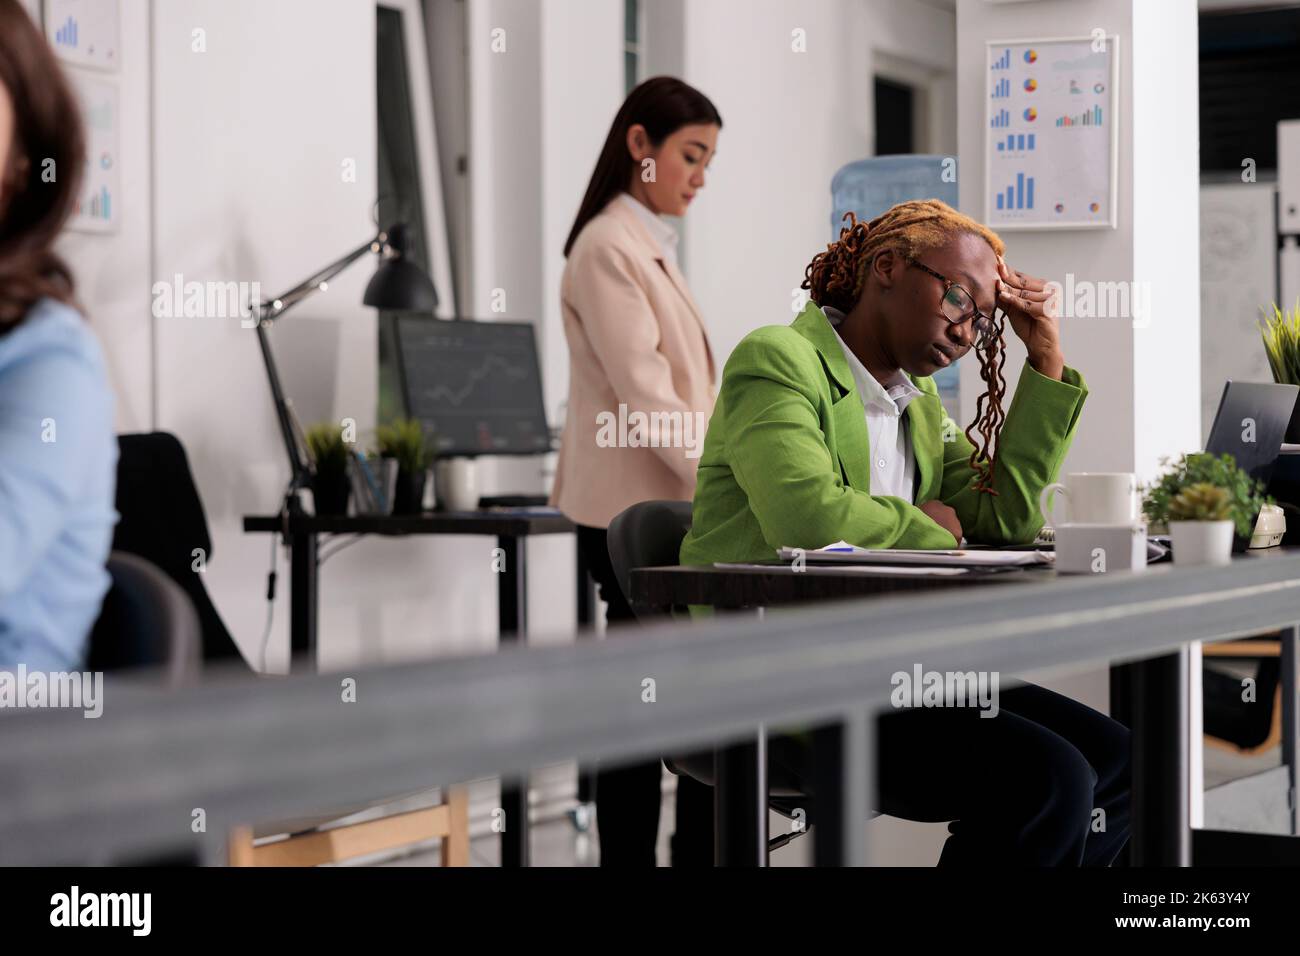 Sad employee having headache at work, touching forehead, exhausted woman in coworking space. Office worker suffering from migraine symptom, frustrated person feeling unwell at workplace Stock Photo